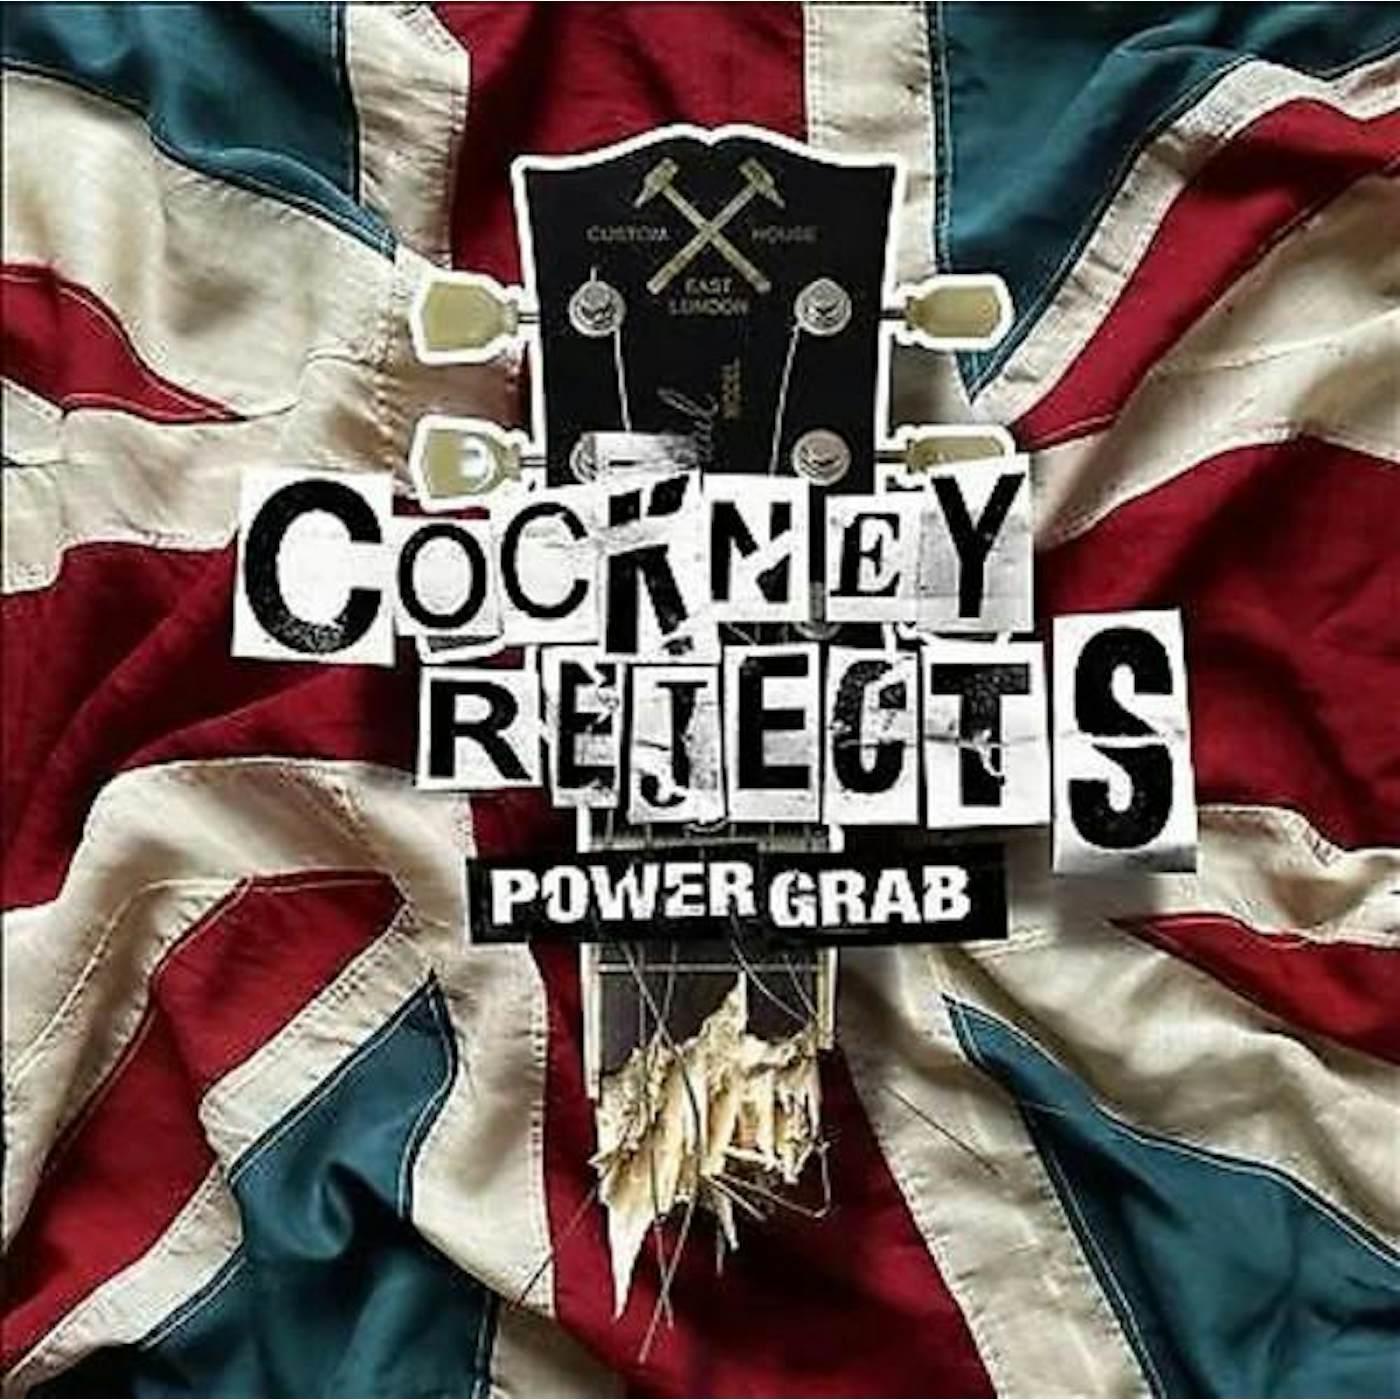 Cockney Rejects POWER GRAB CD